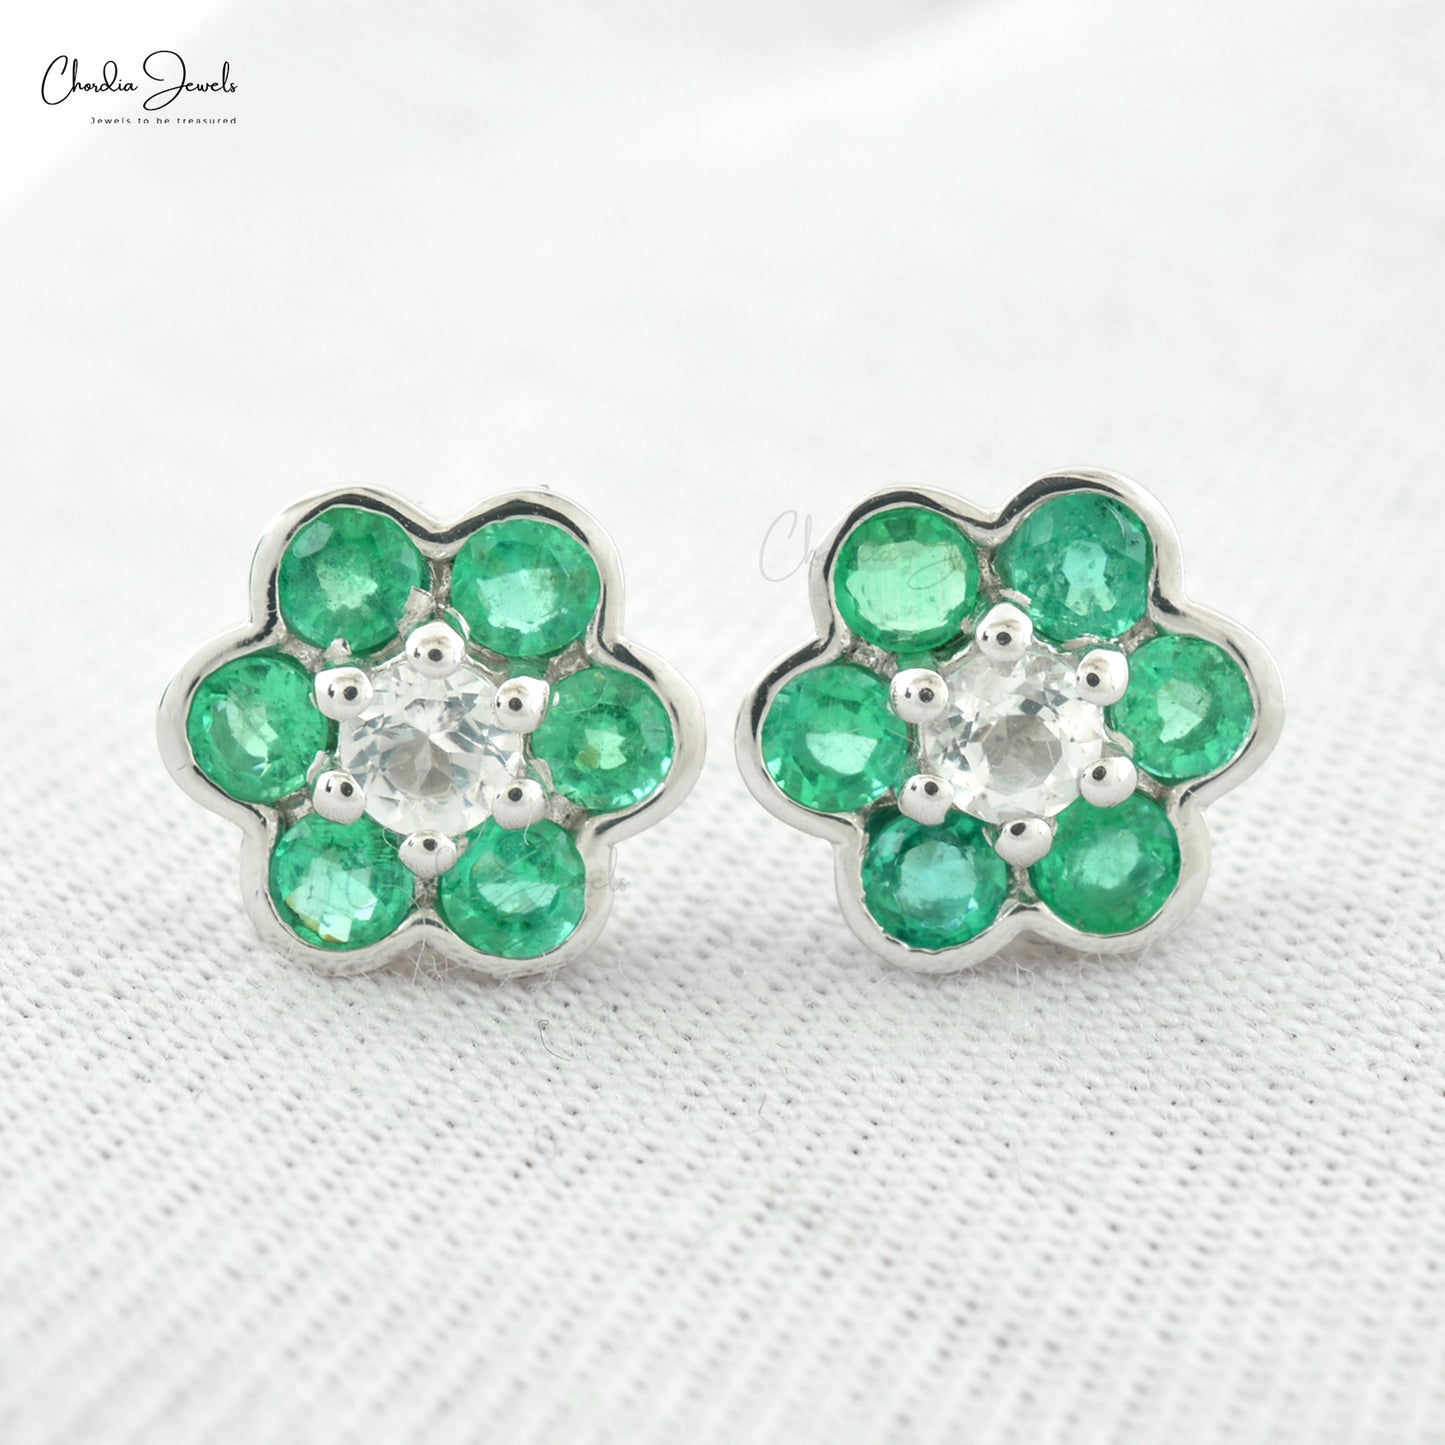 Unveil the magic of our green emerald earrings.